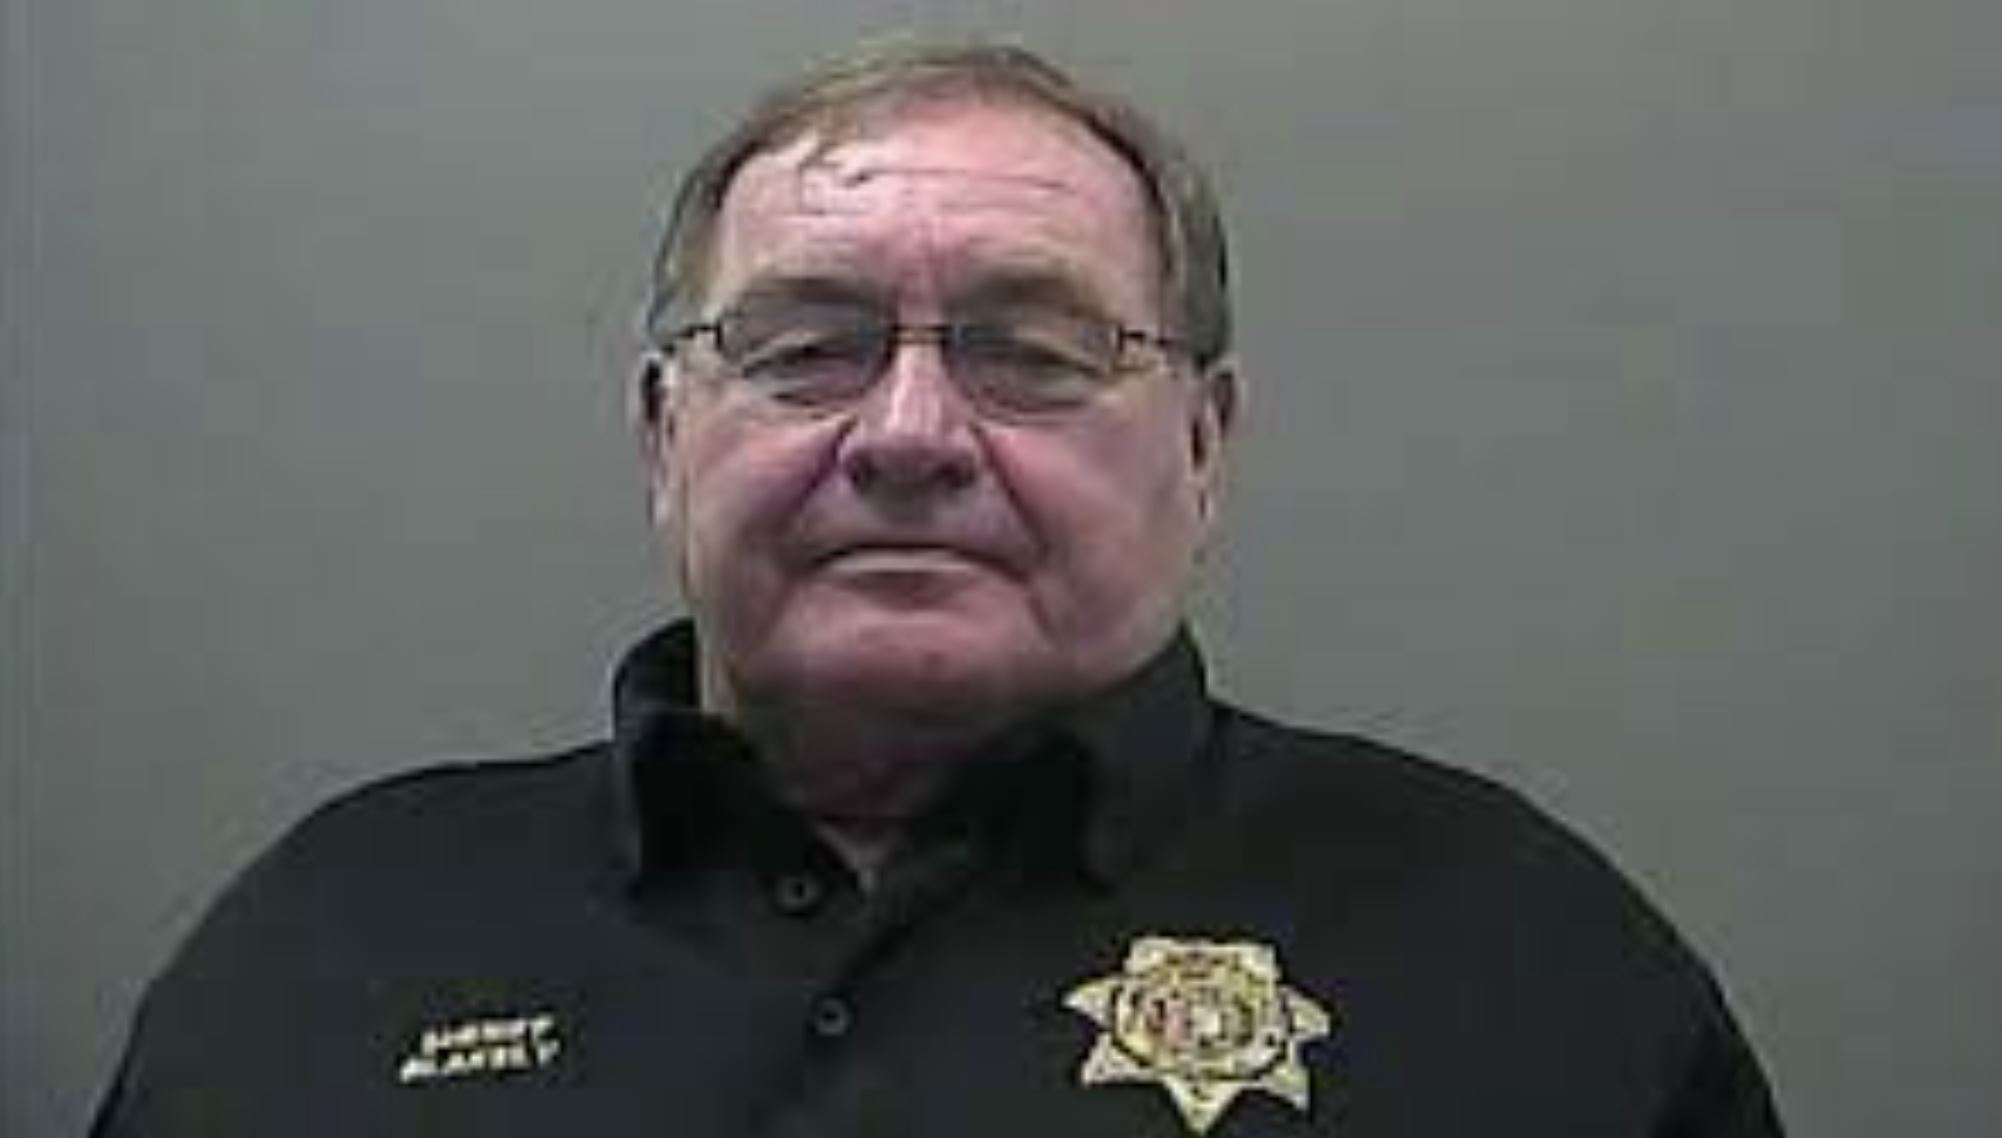 Former Alabama sheriff sentenced to 3 years for theft and ethics violation